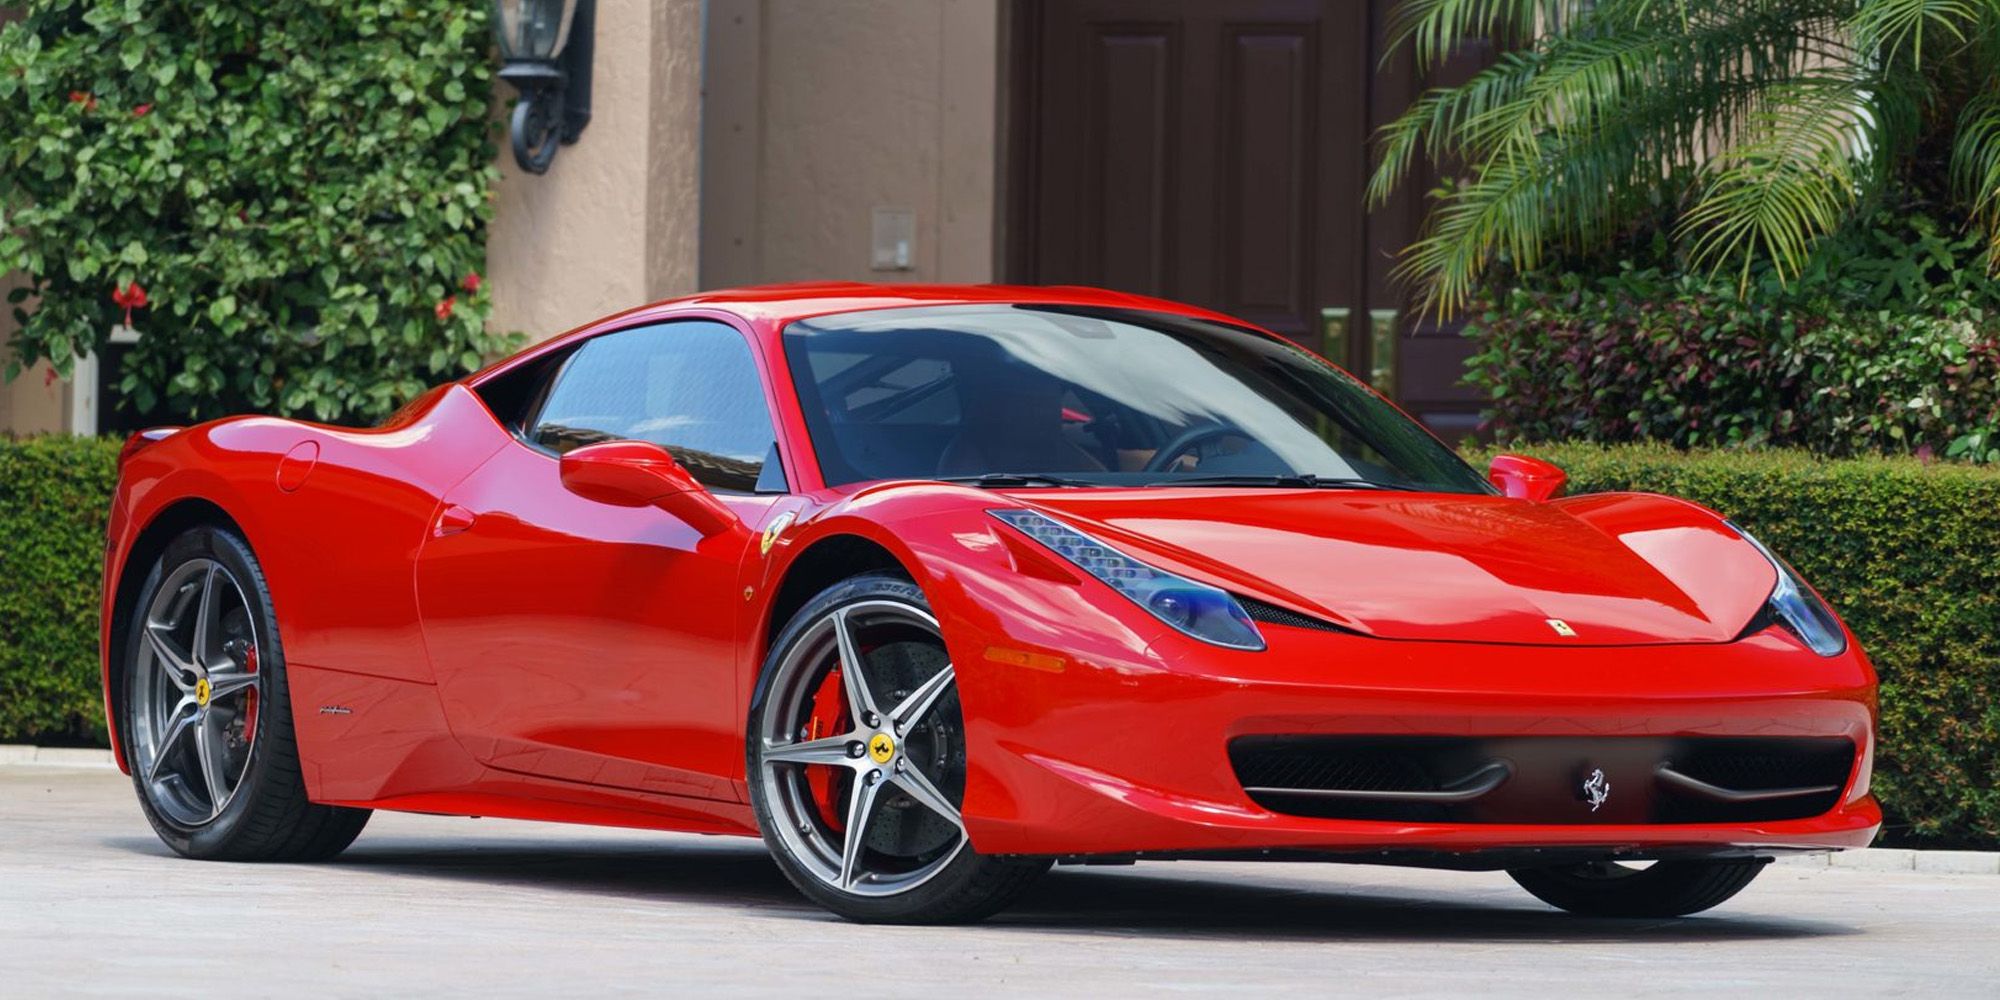 The front of a red 458 Italia